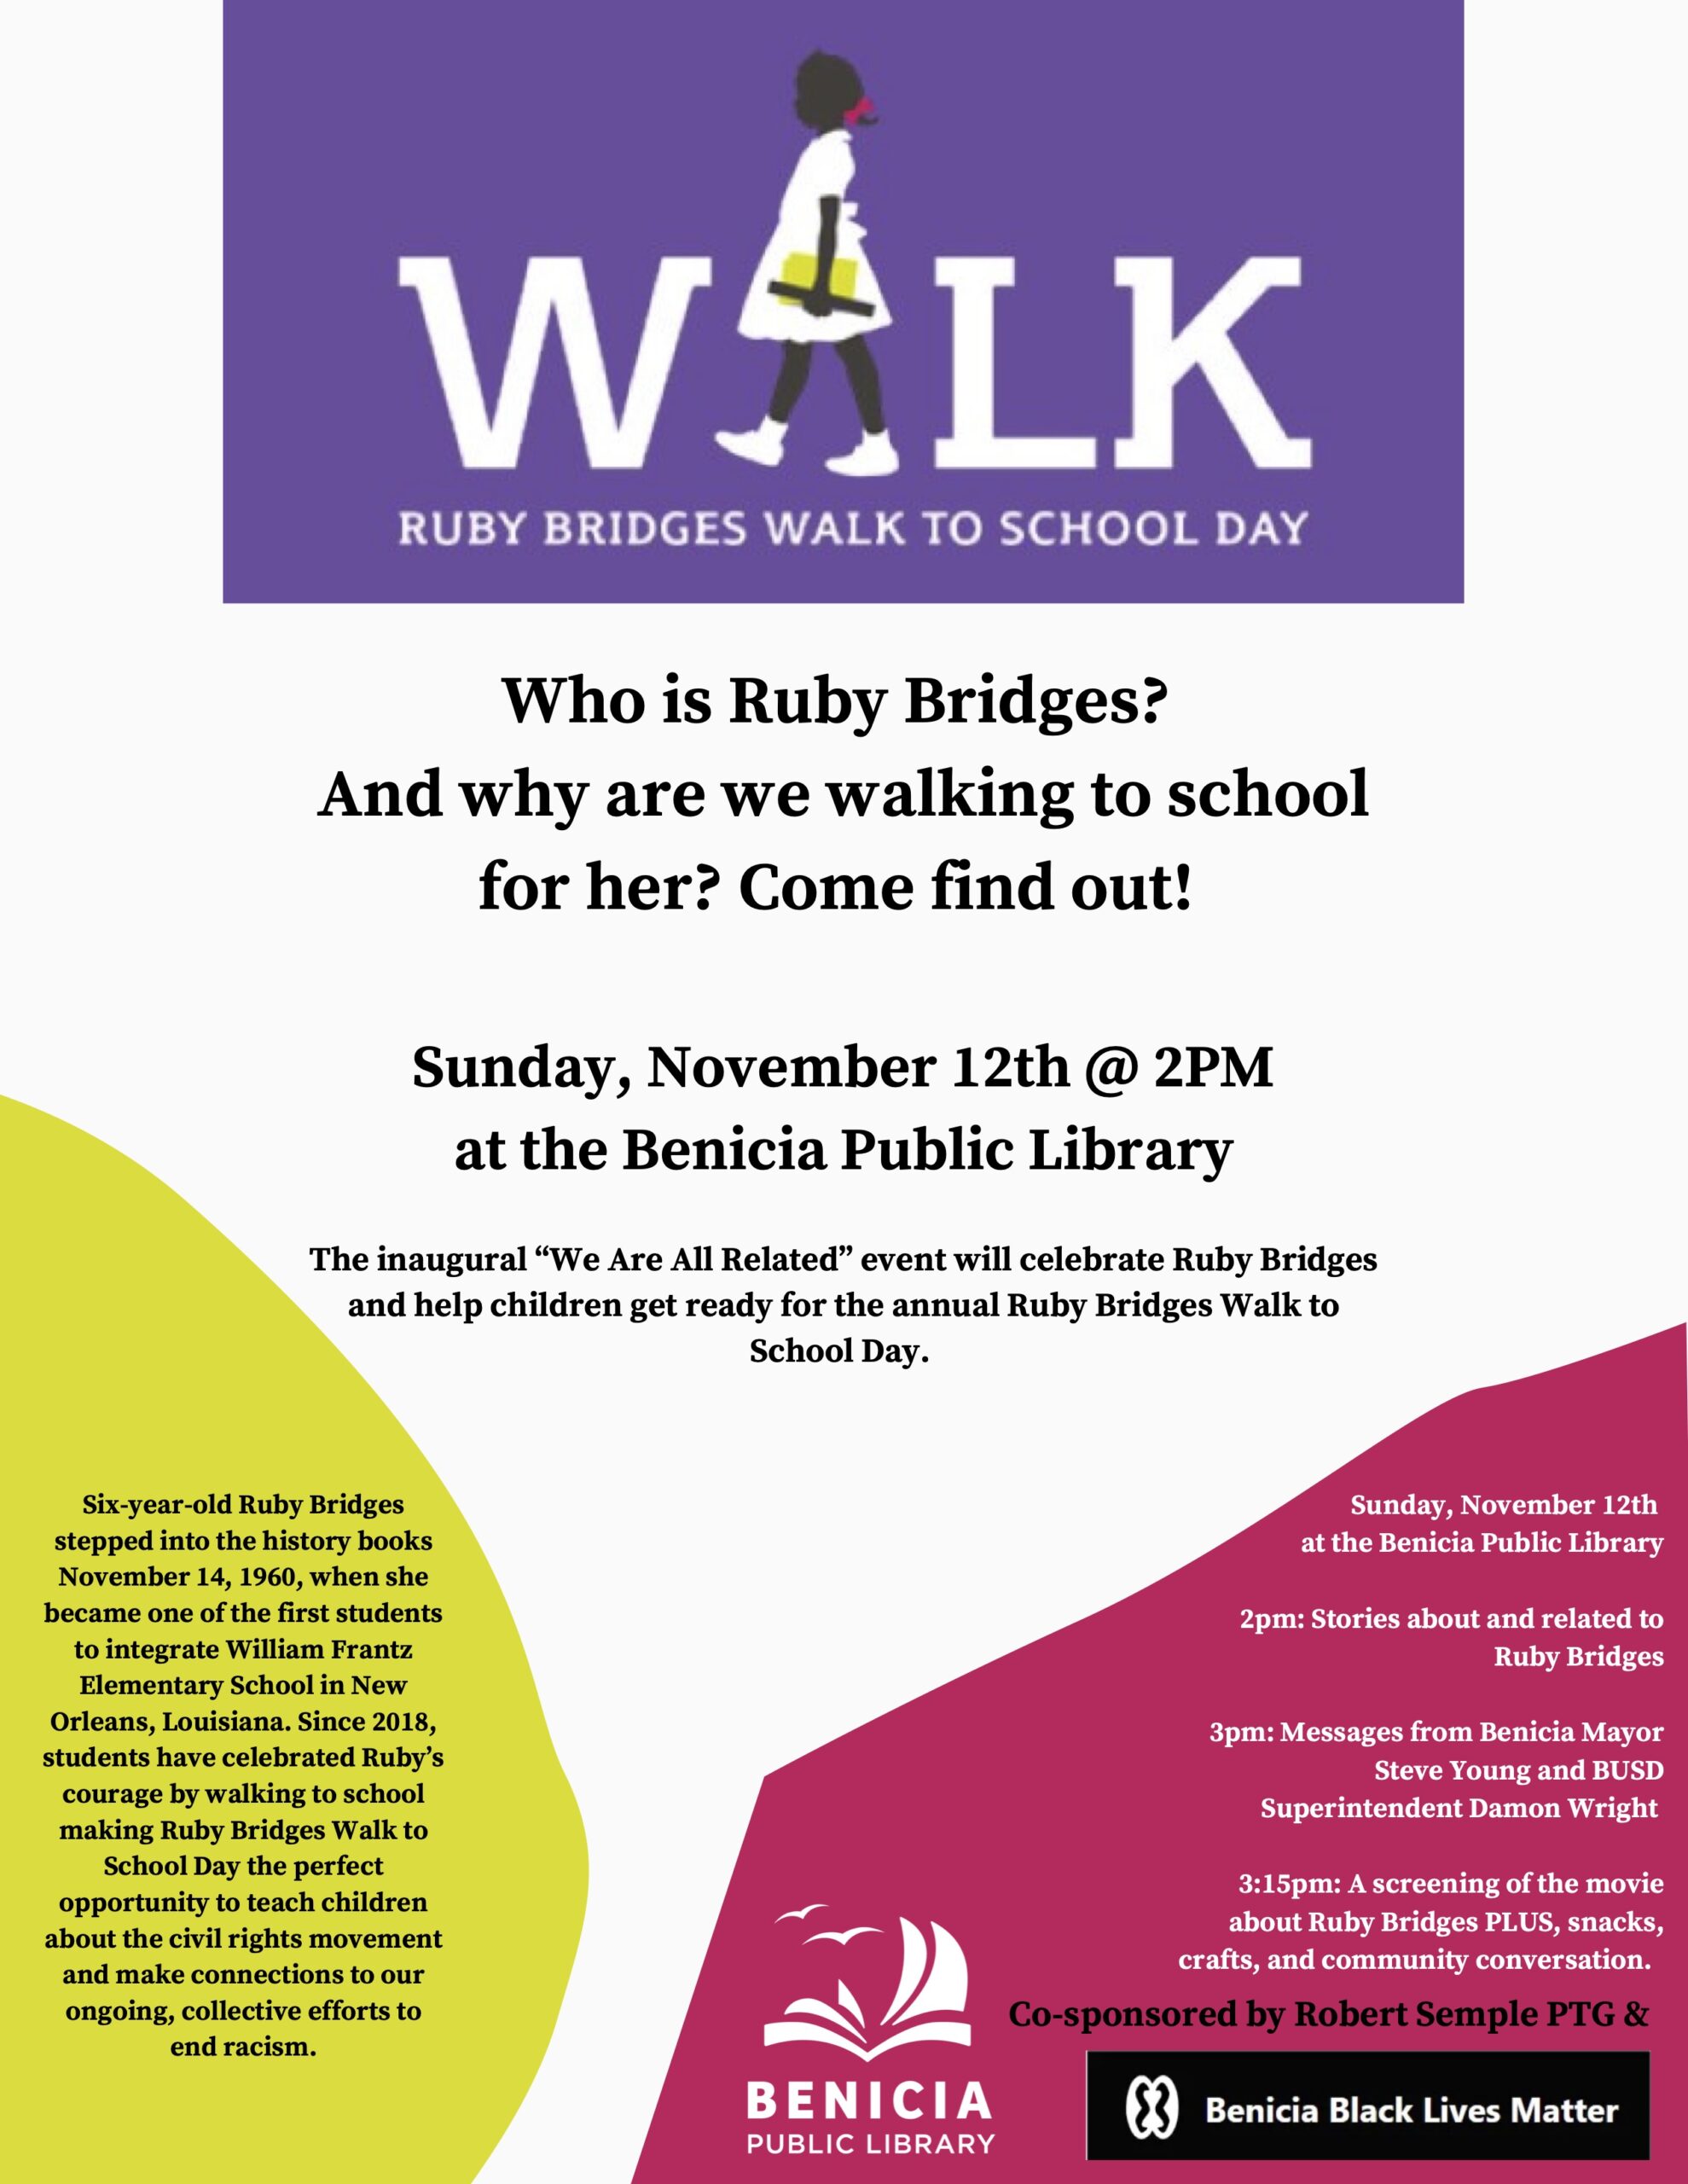 TODAY 2-5 pm – Learn about Ruby Bridges at Benicia Public